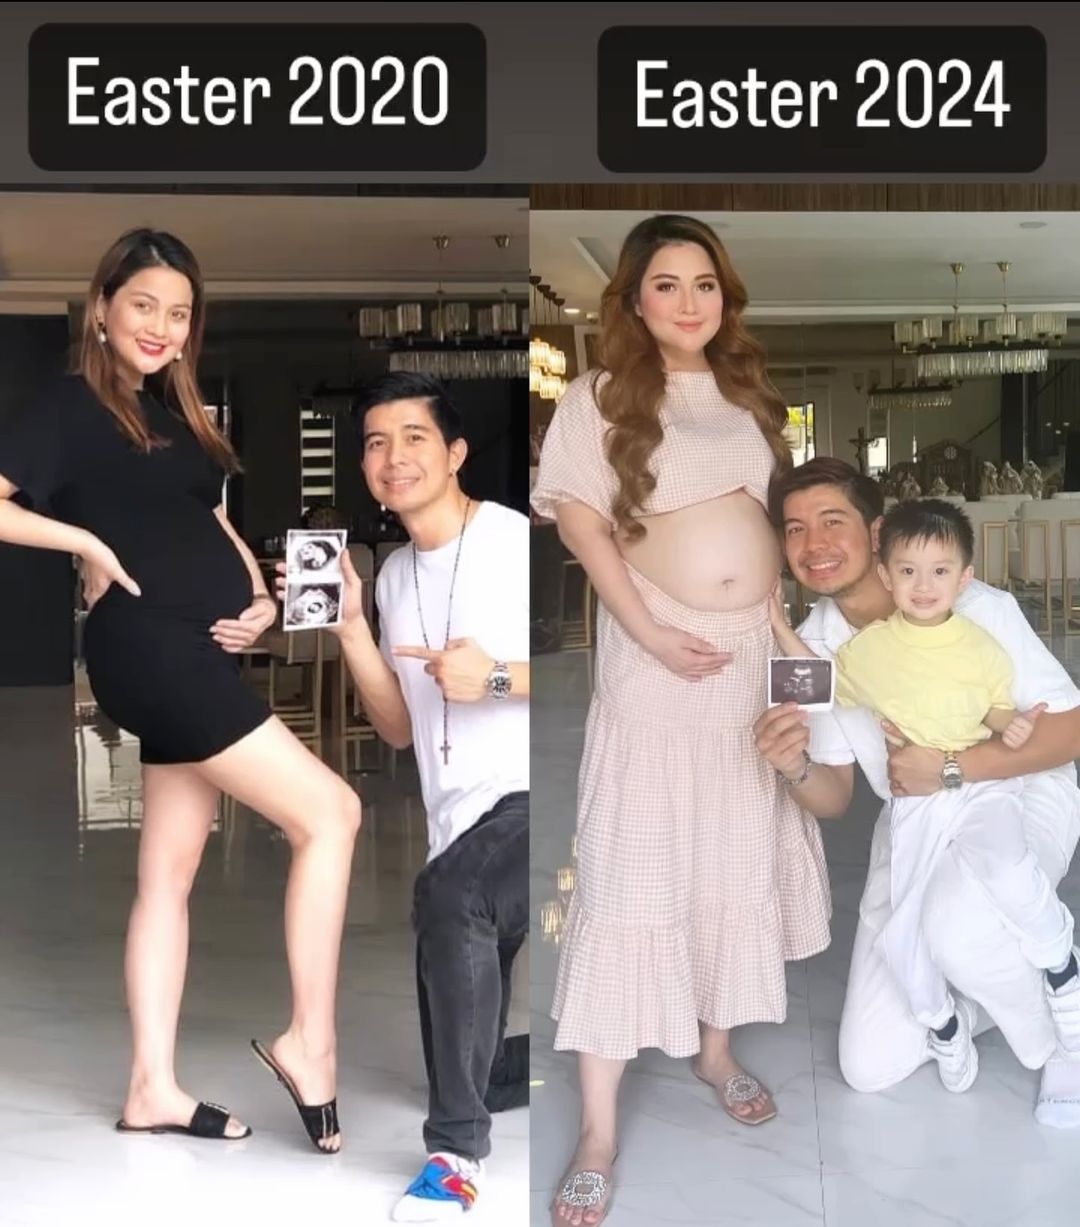 Dianne Medina and Rodjun Cruz pregnancy announcement photos side by side